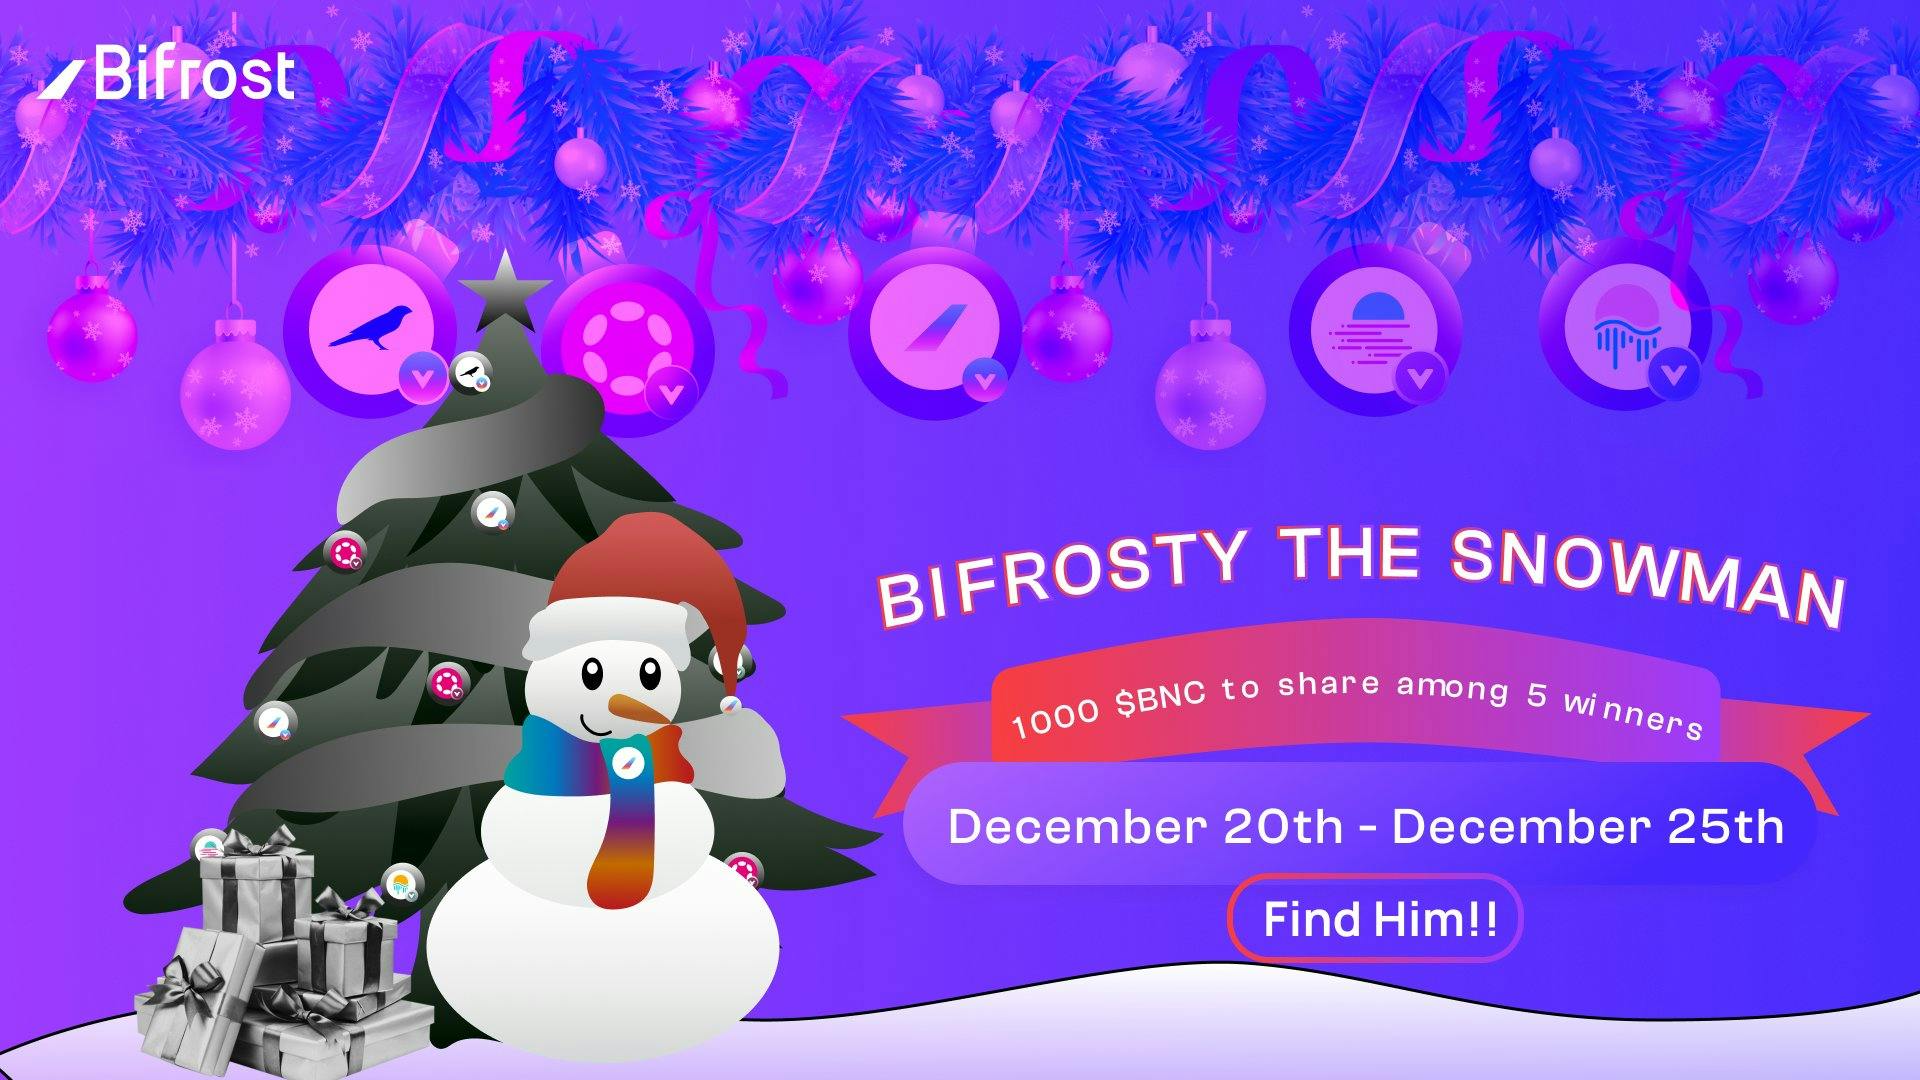 Bifrost Christmas giveaway - Find Bifrosty the snowman !!